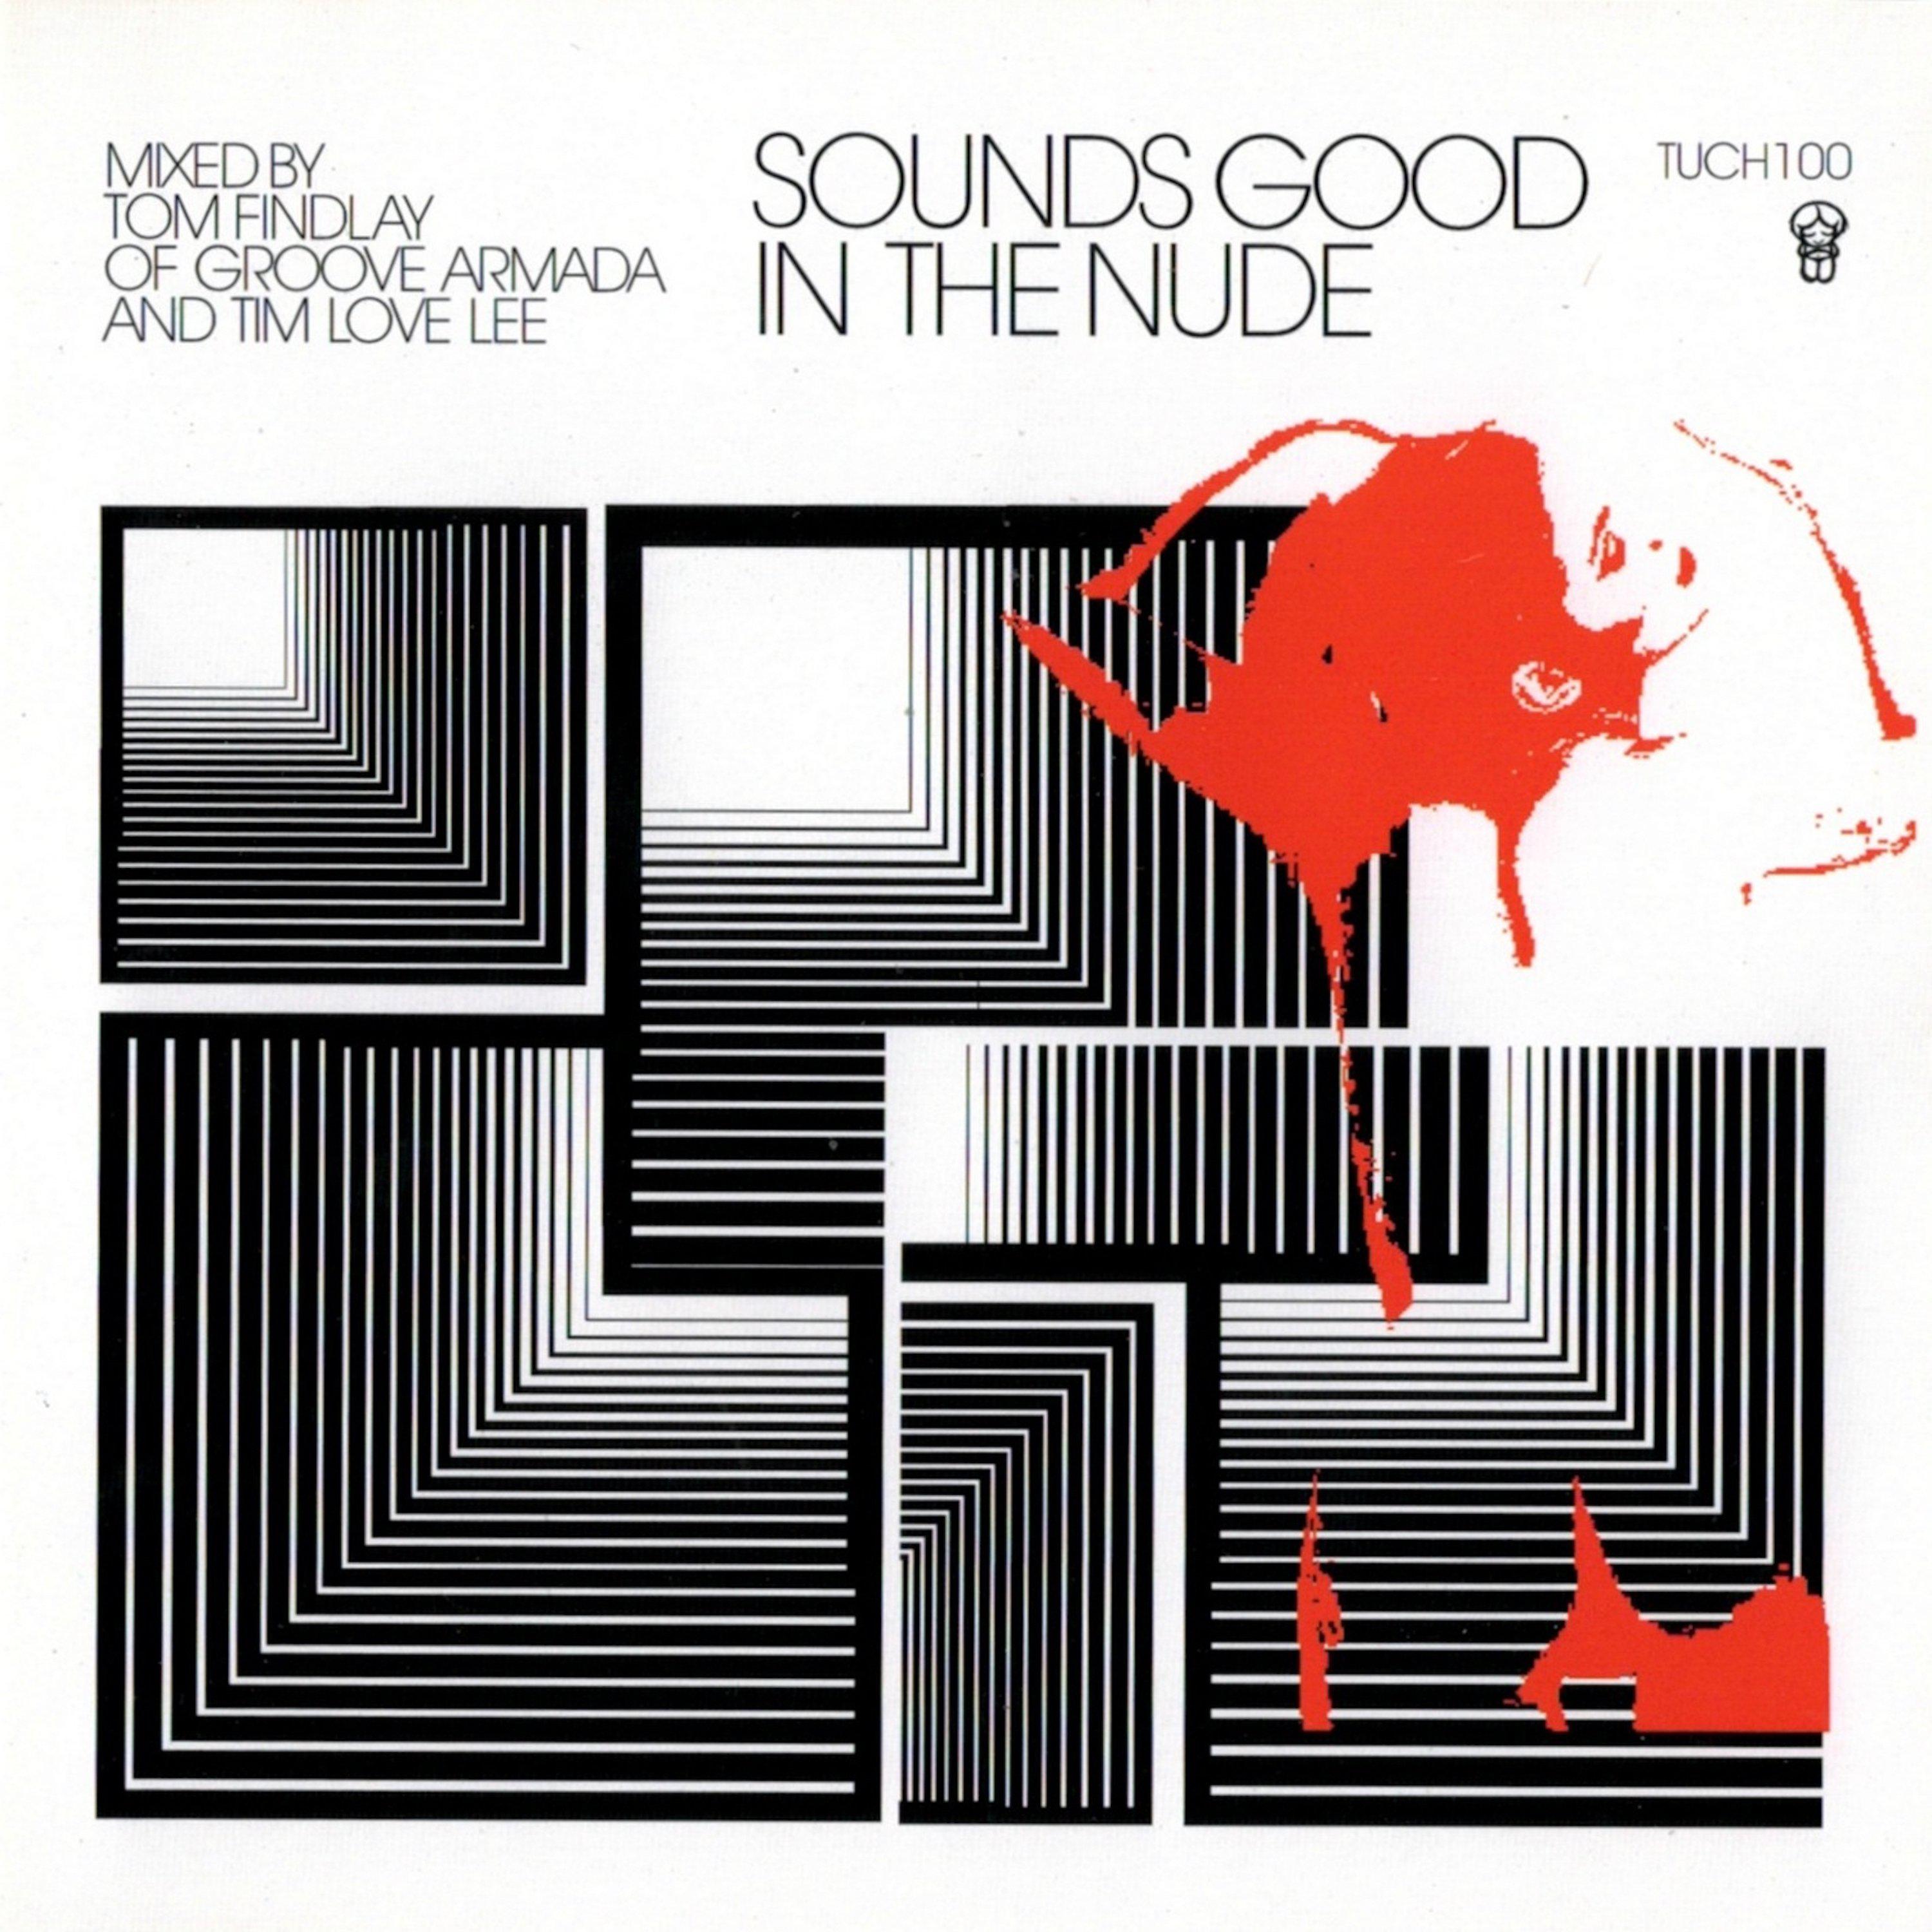 Sounds Good In The Nude (Selected and Mixed by Tim Love Lee and Groove Armada's Tom Findlay)